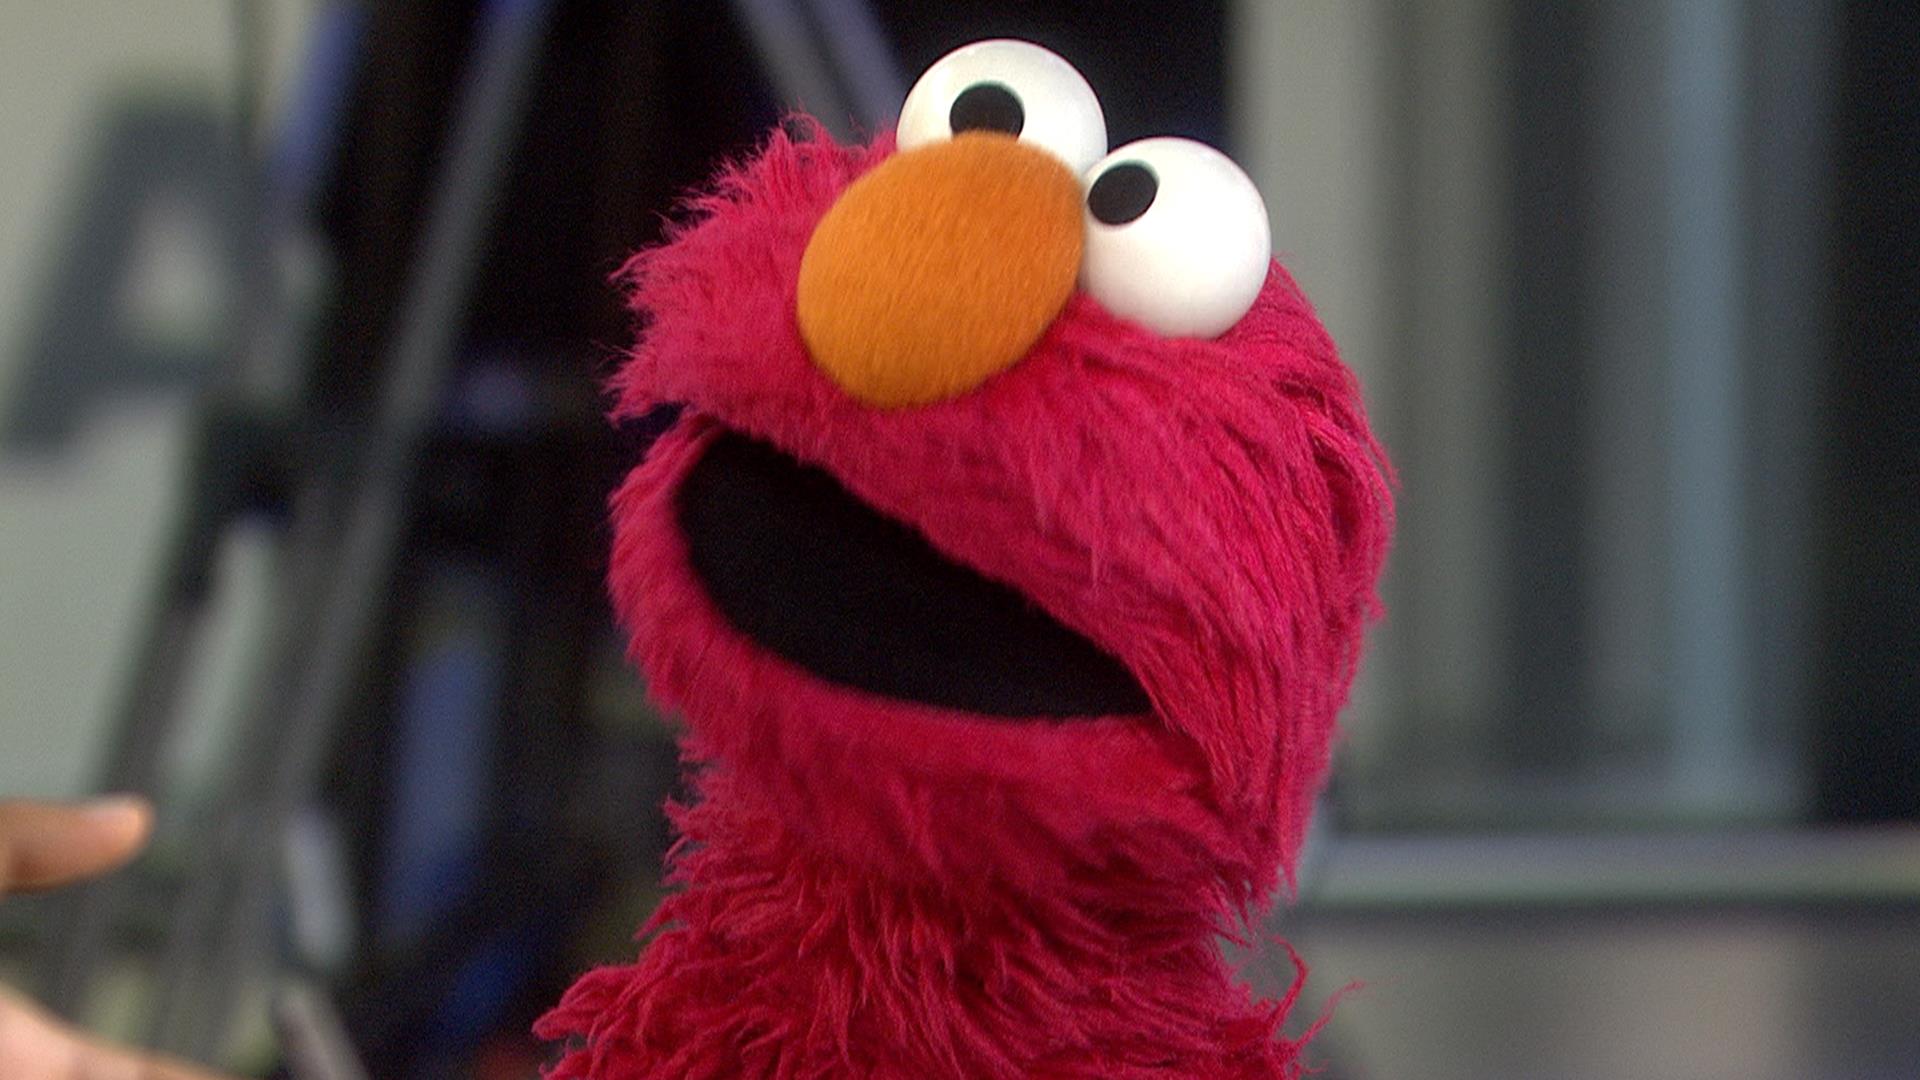 Wednesday is National Tell a Joke Day, and “Sesame Street” star Elmo joins ...